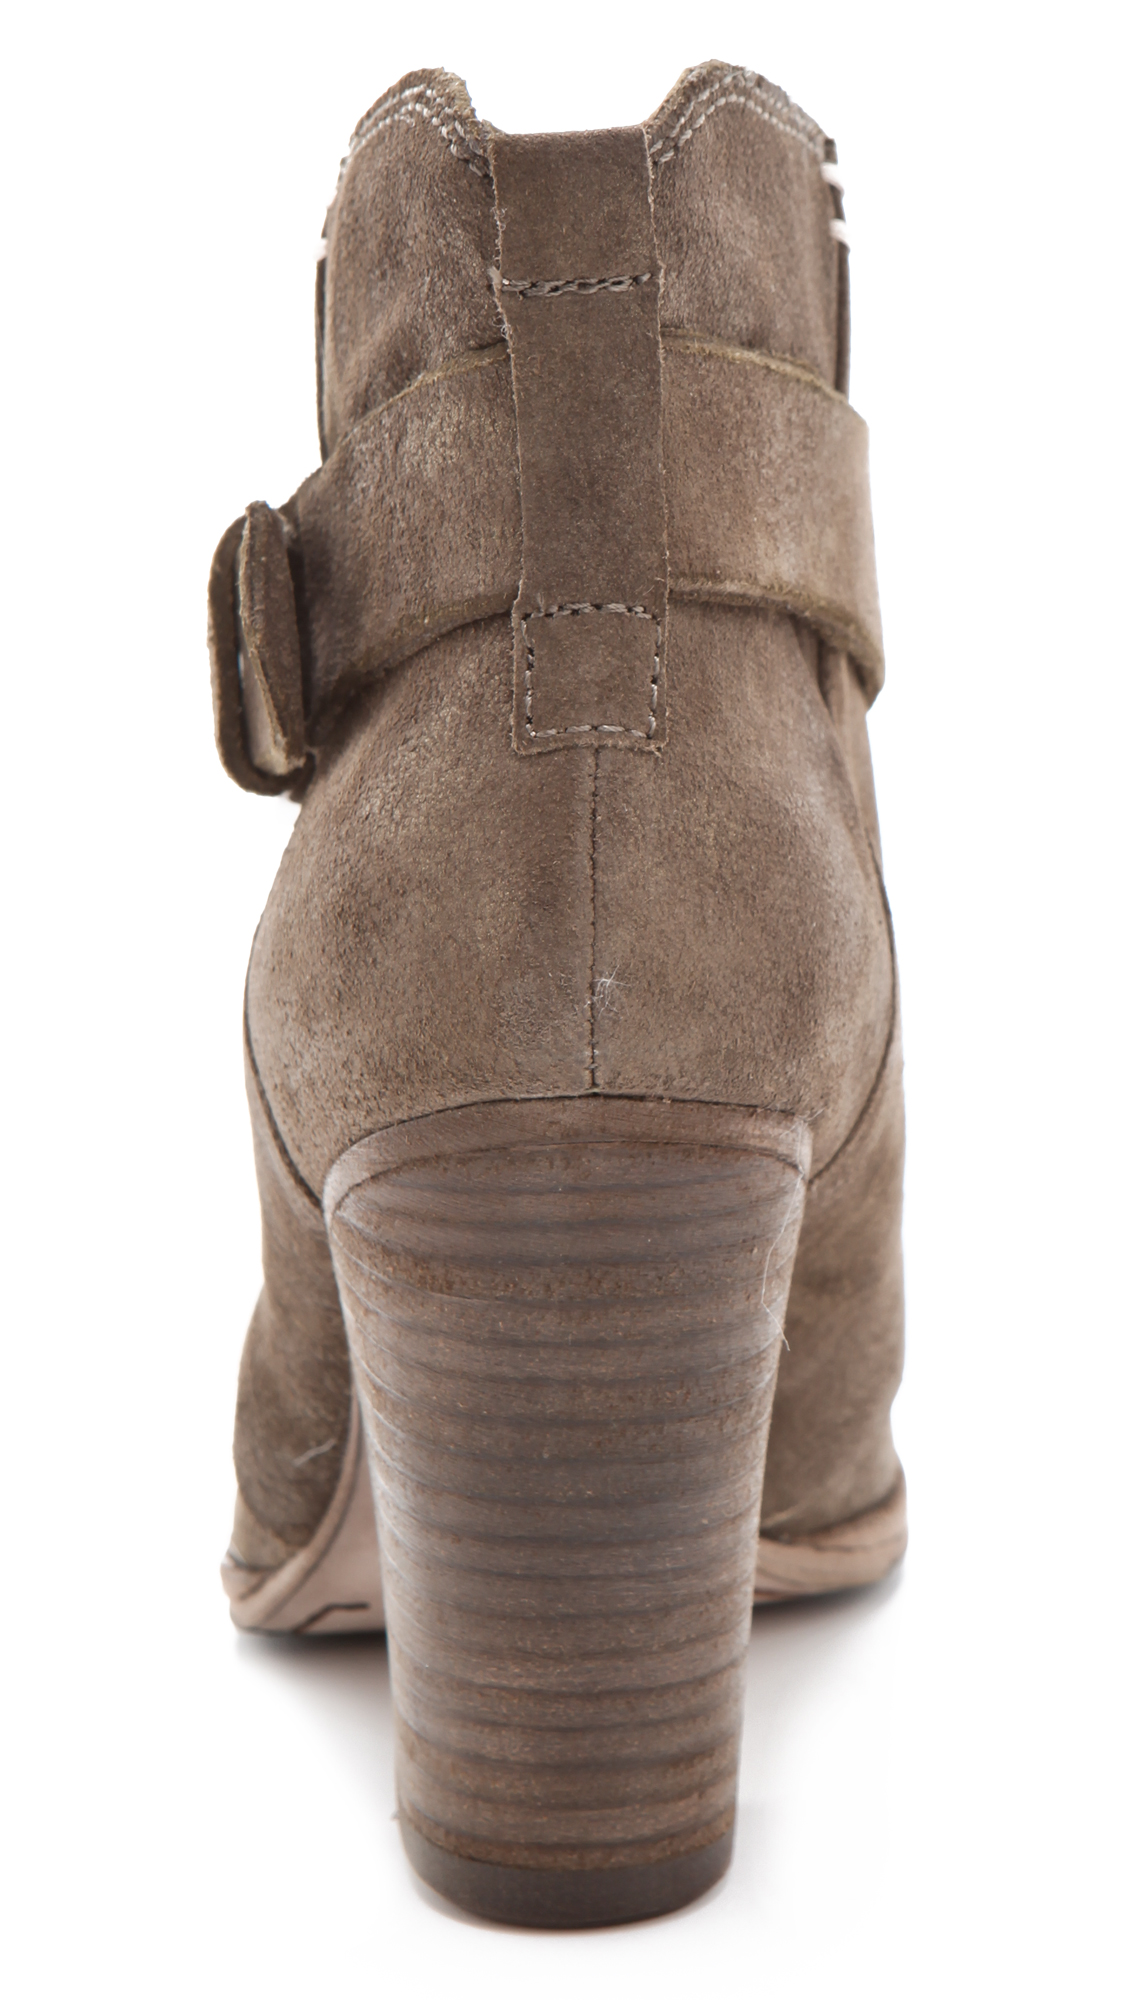 Lyst - Belle By Sigerson Morrison Nicol Nubuck Booties in Natural